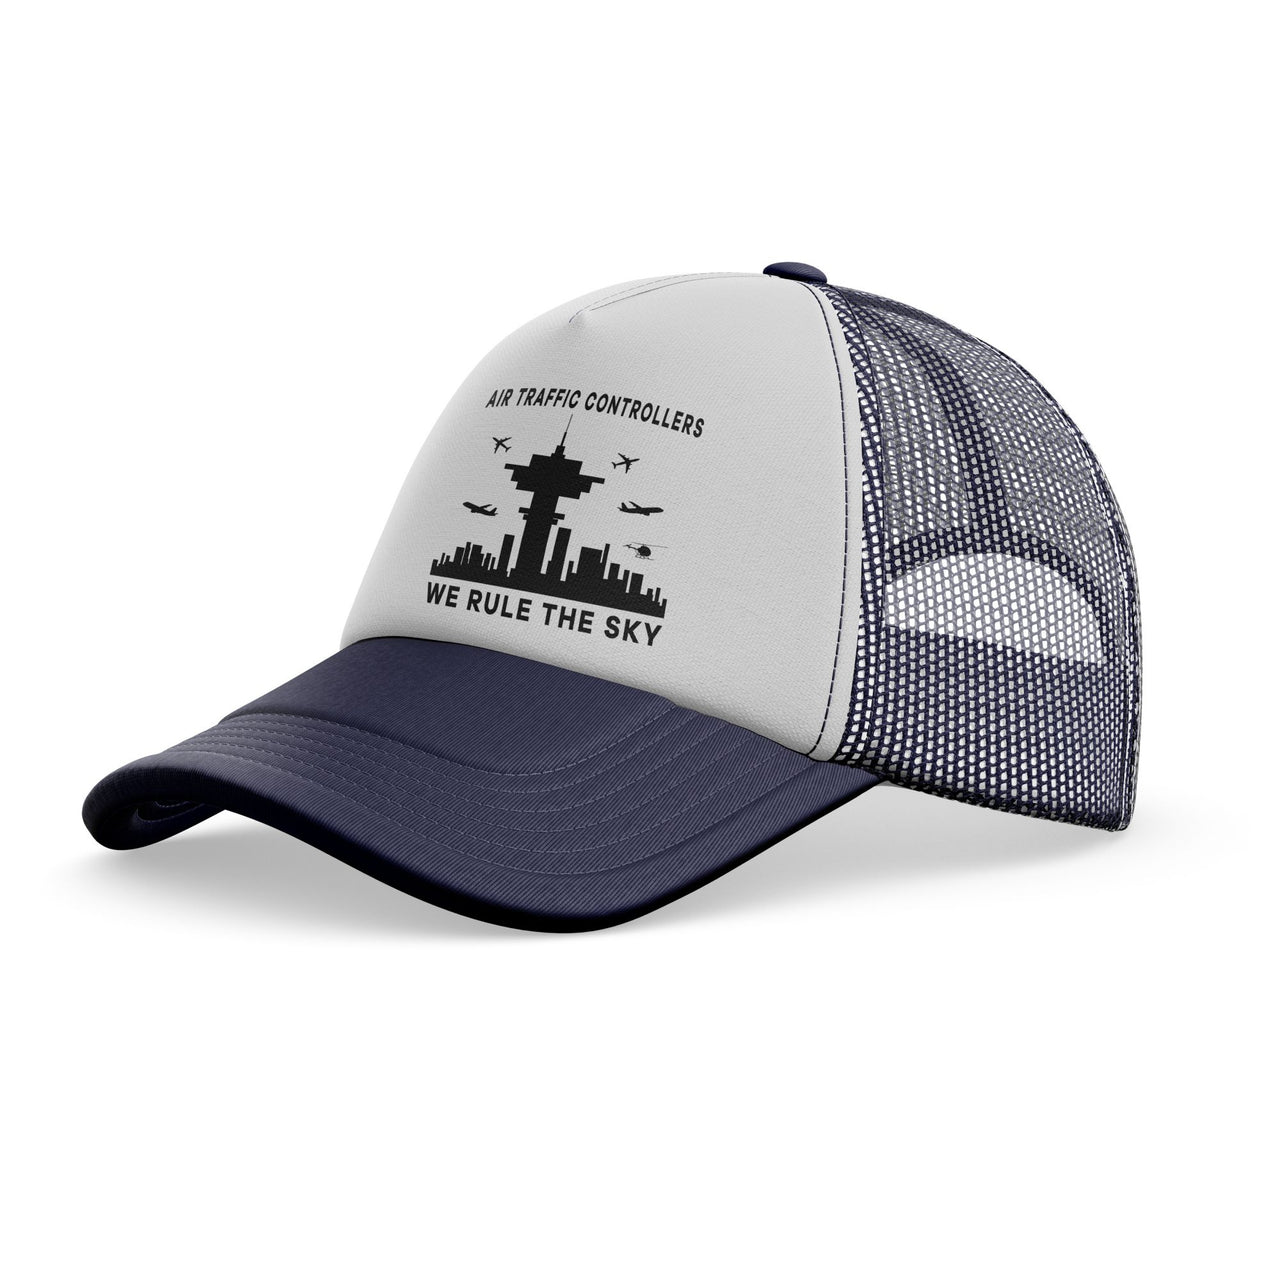 Air Traffic Controllers - We Rule The Sky Designed Trucker Caps & Hats